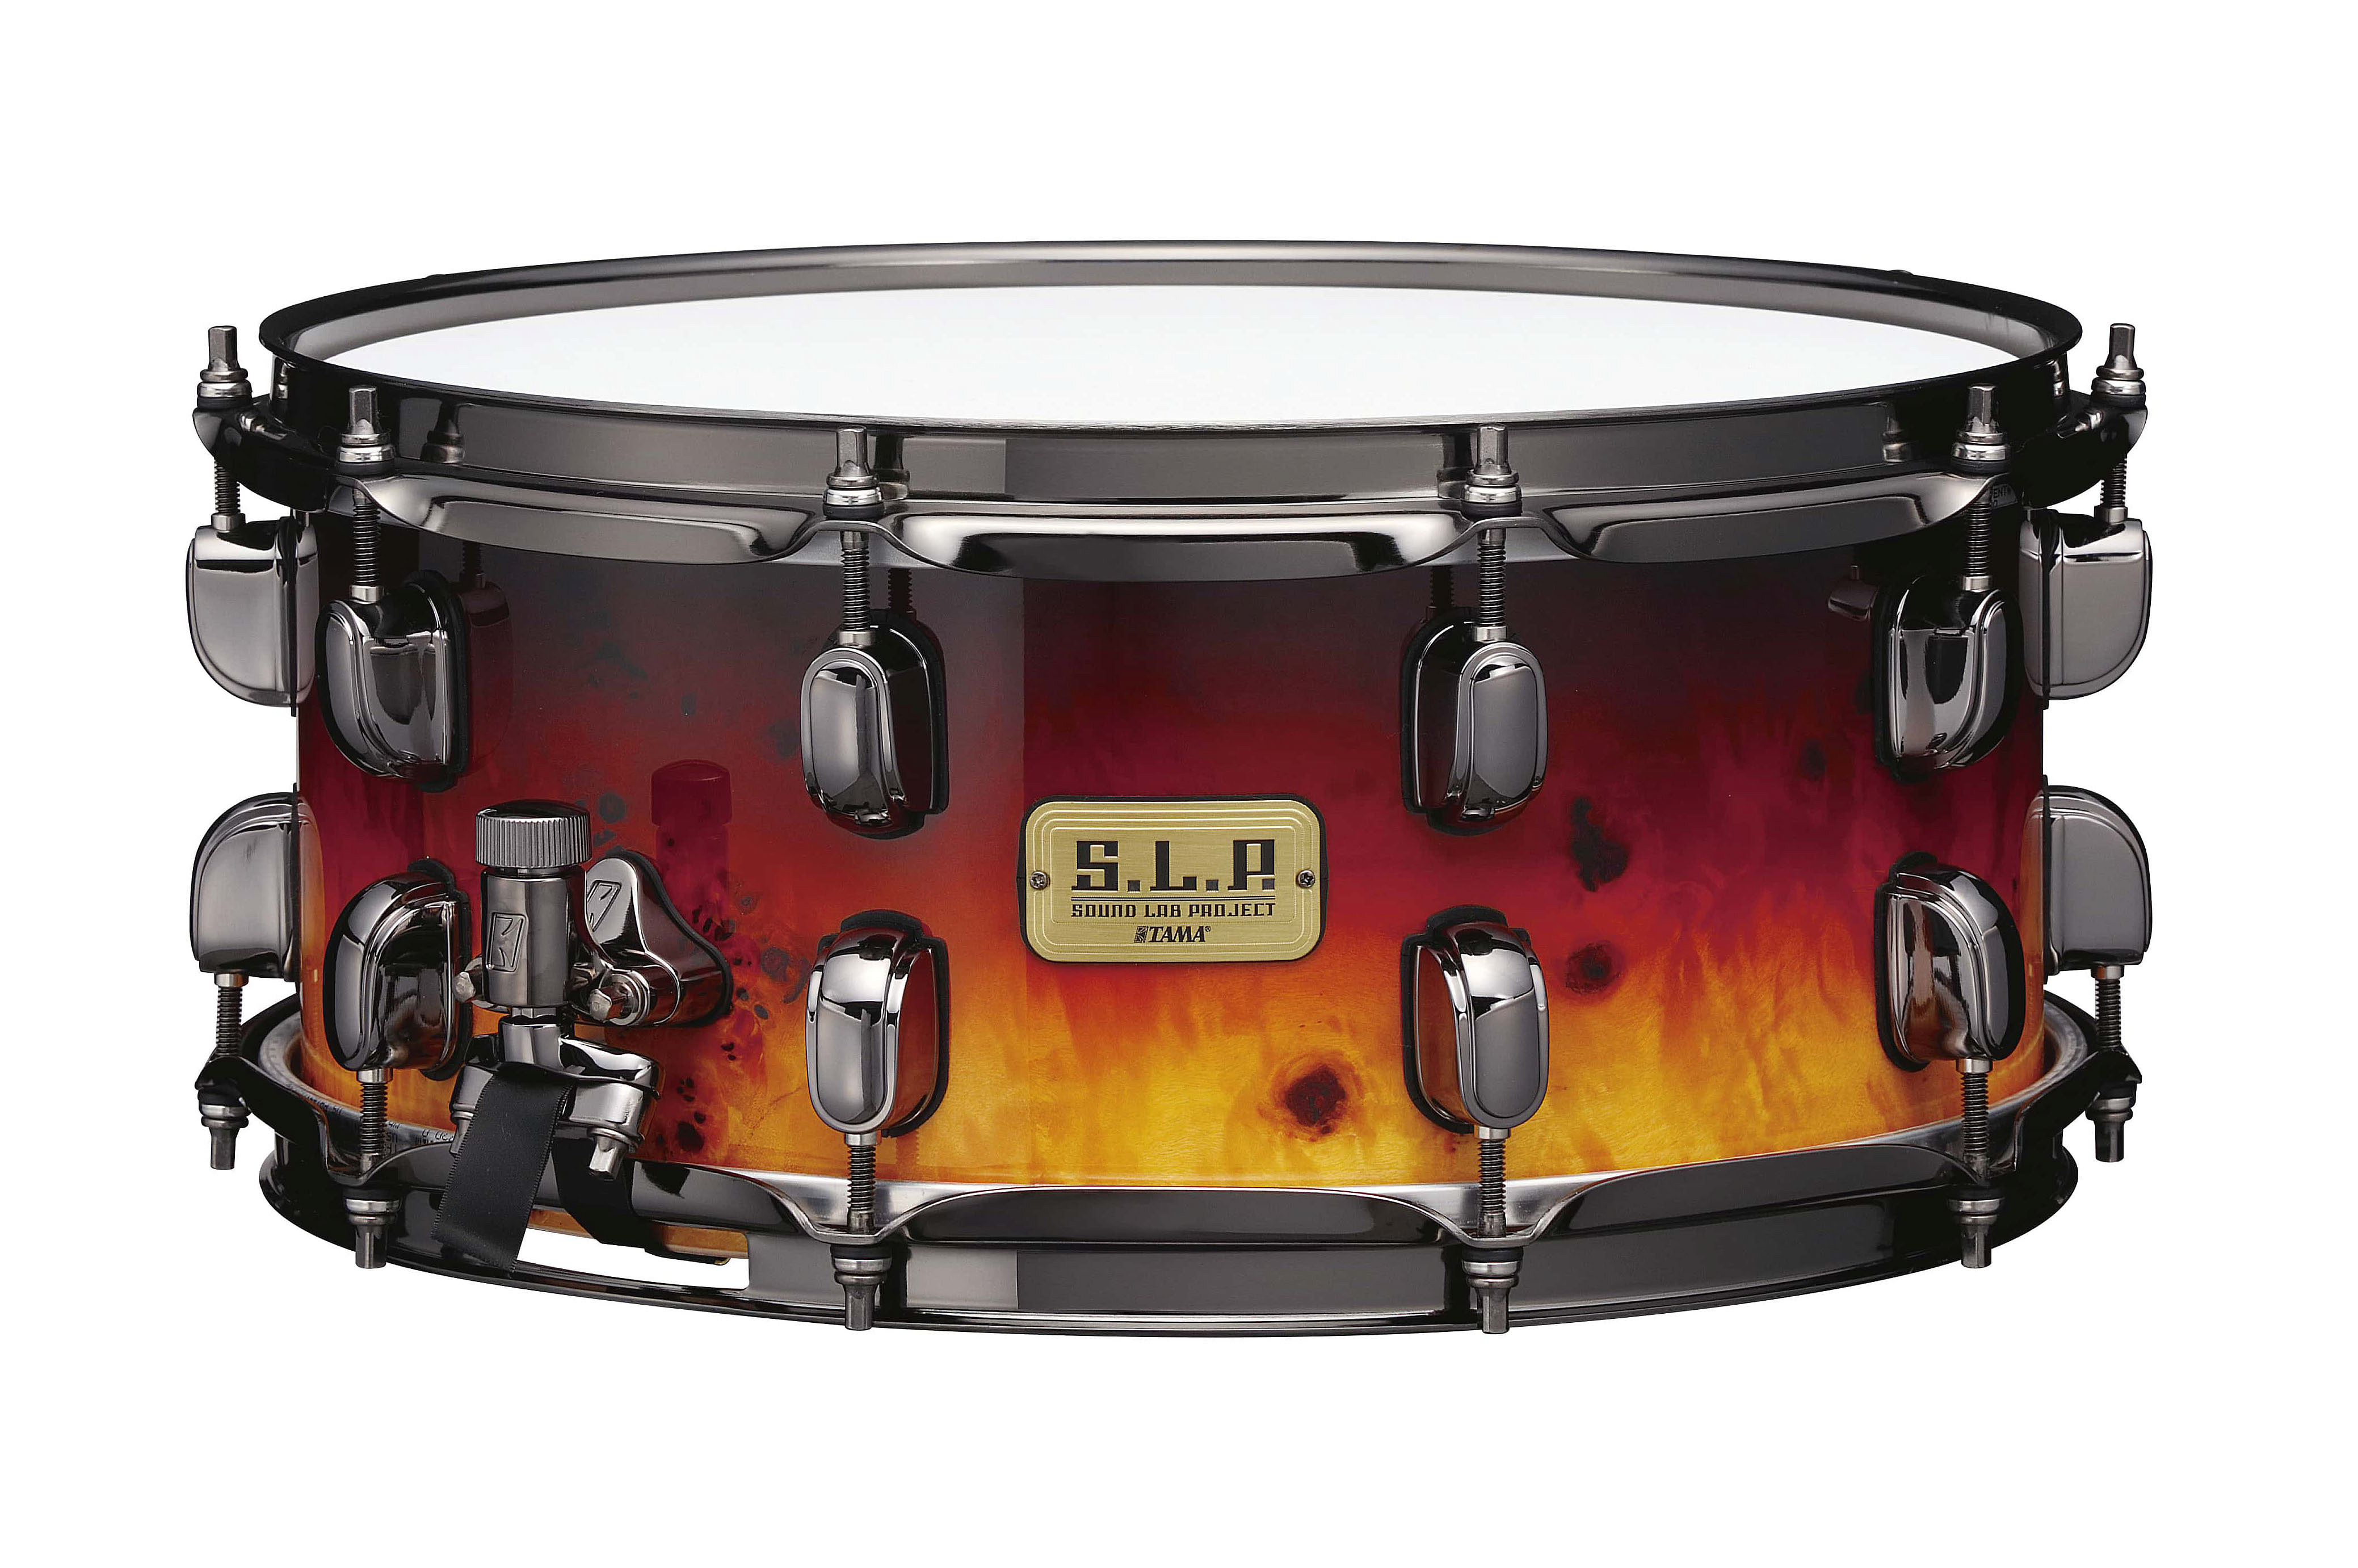 TAMA LGK146-ASF S.L.P. 14"X6" G-KAPUR SNARE DRUM W/ MAPPA BURL OUTER PLY -LIMITED PRODUCT- - фото 1